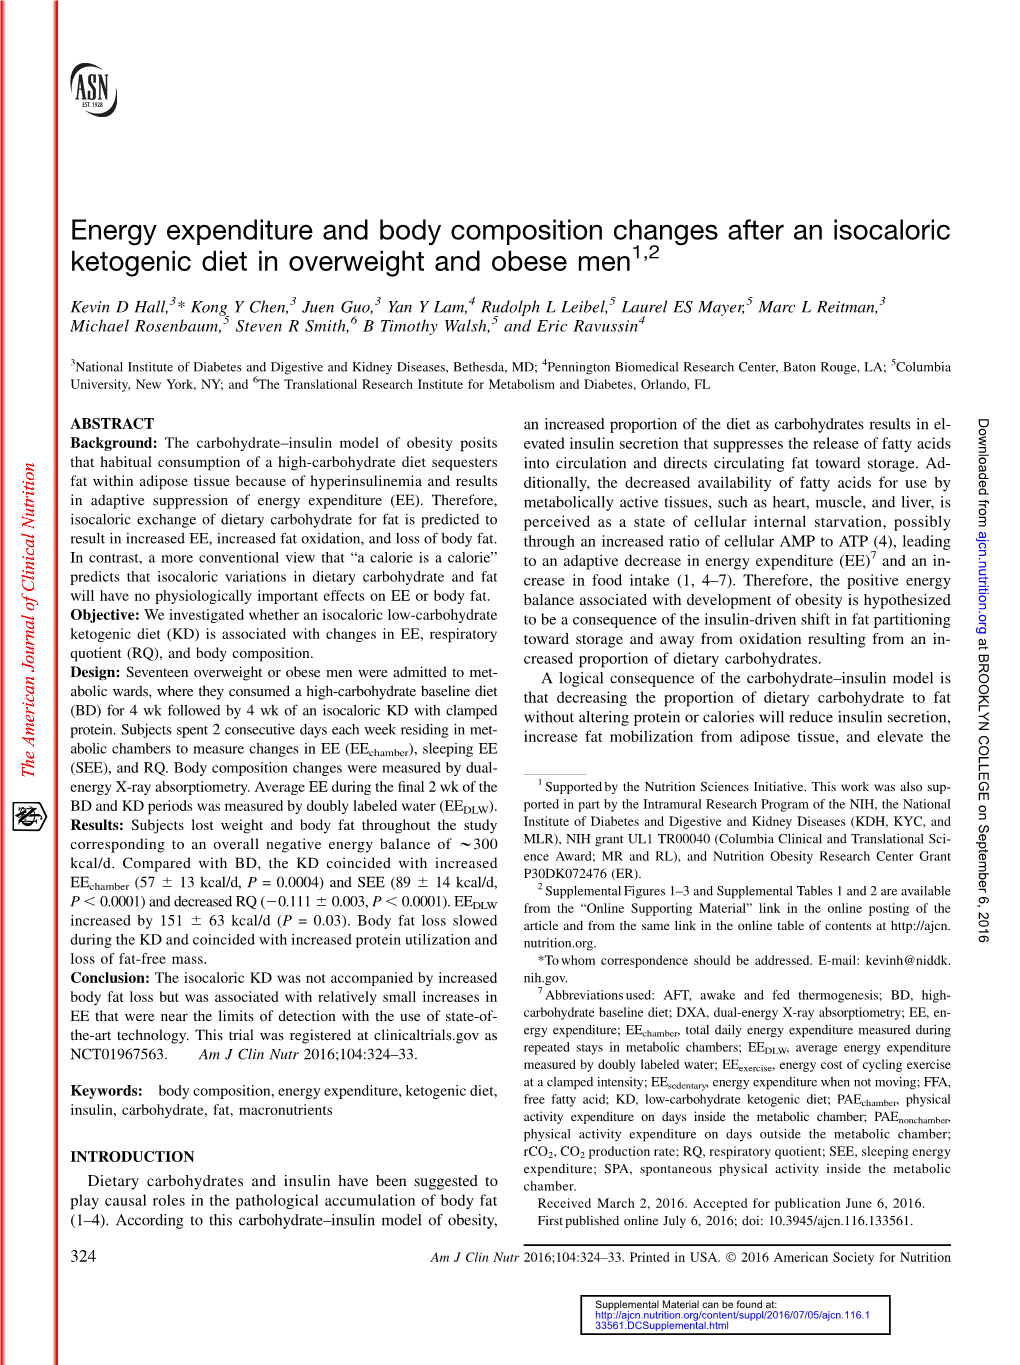 Energy Expenditure and Body Composition Changes After an Isocaloric Ketogenic Diet in Overweight and Obese Men1,2